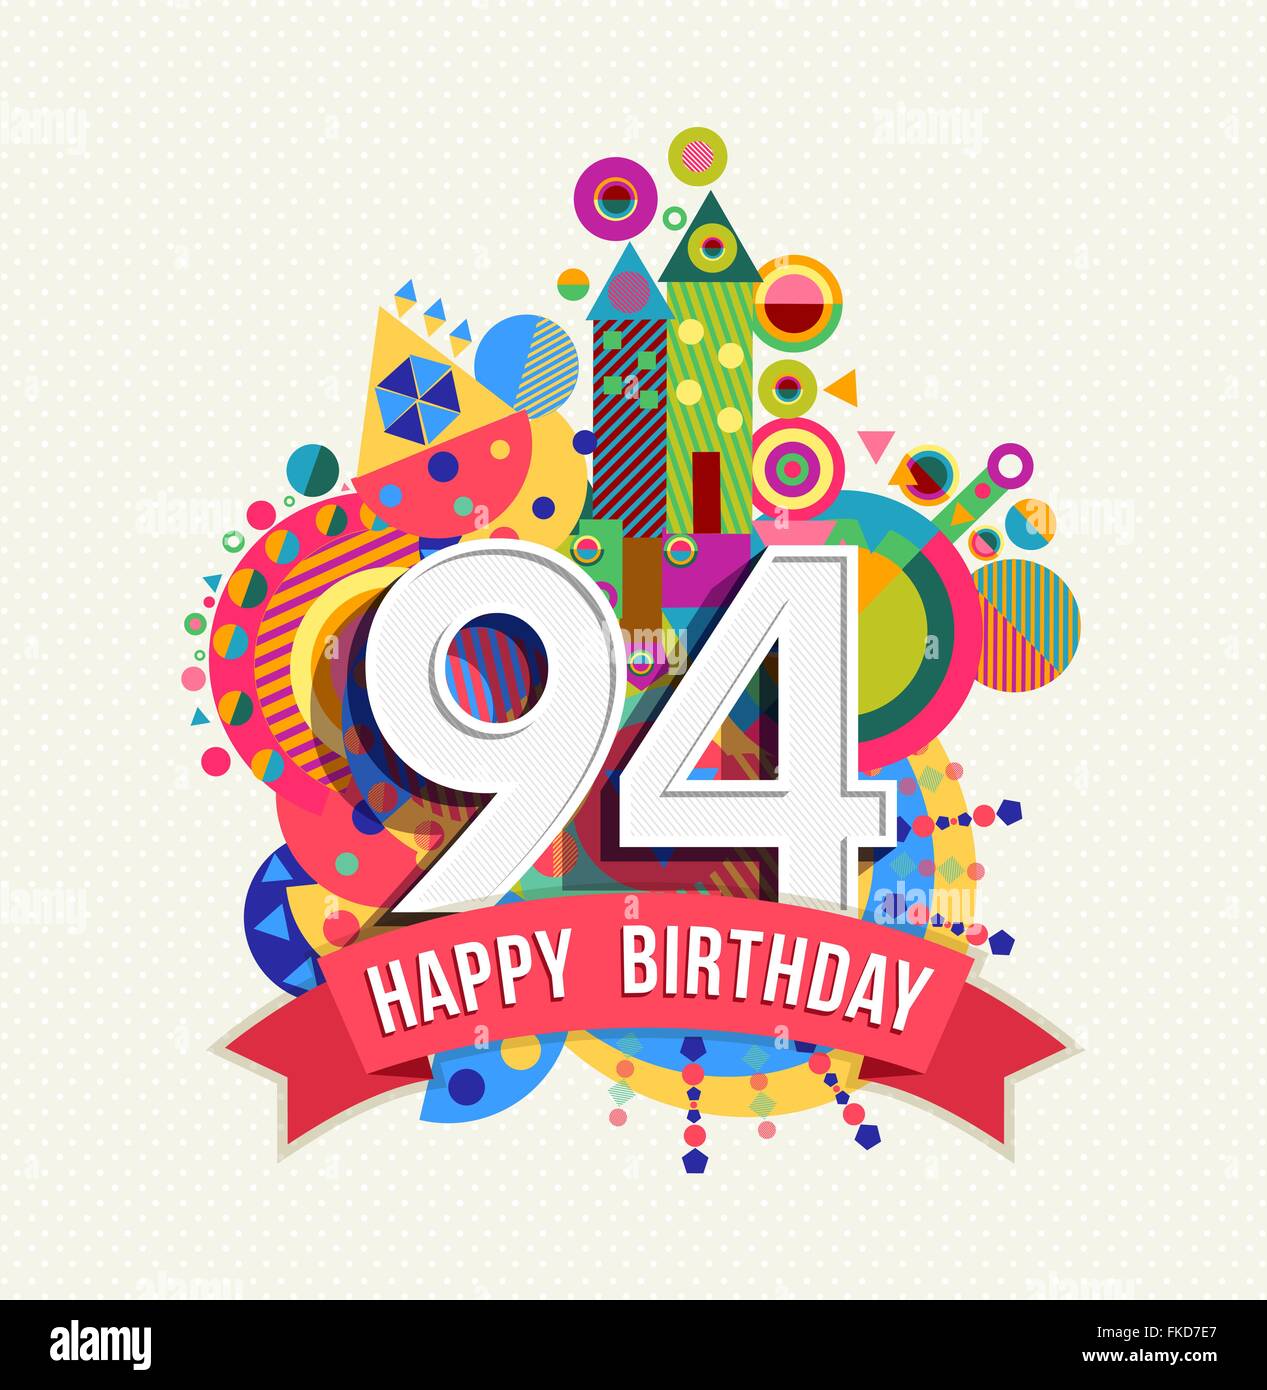 Happy Birthday ninety four 94 year, fun celebration anniversary greeting card with number, text label and colorful geometry Stock Vector